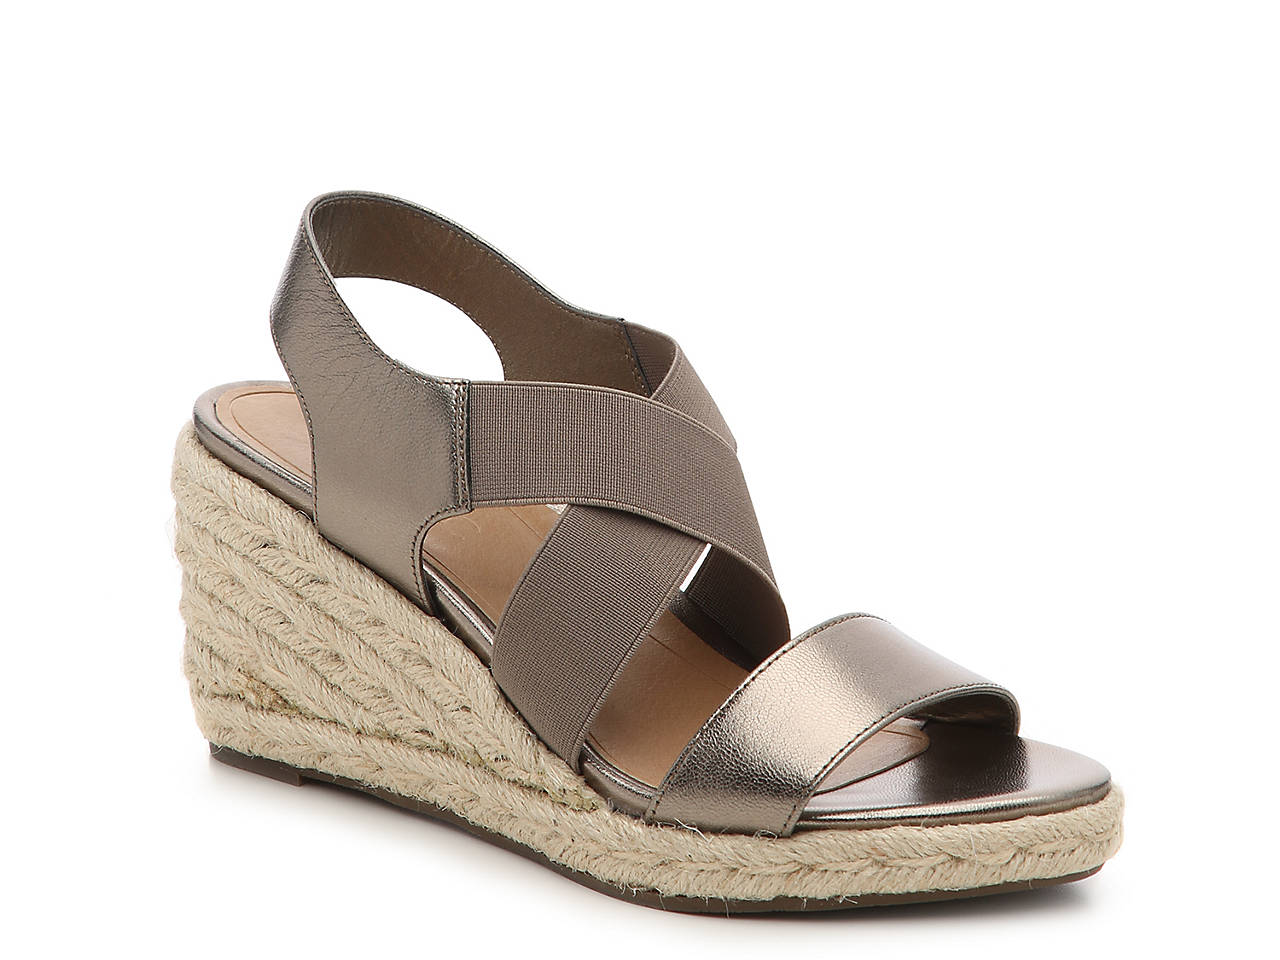 Vionic Ainsleigh Espadrille Wedge Sandal Women's Shoes DSW